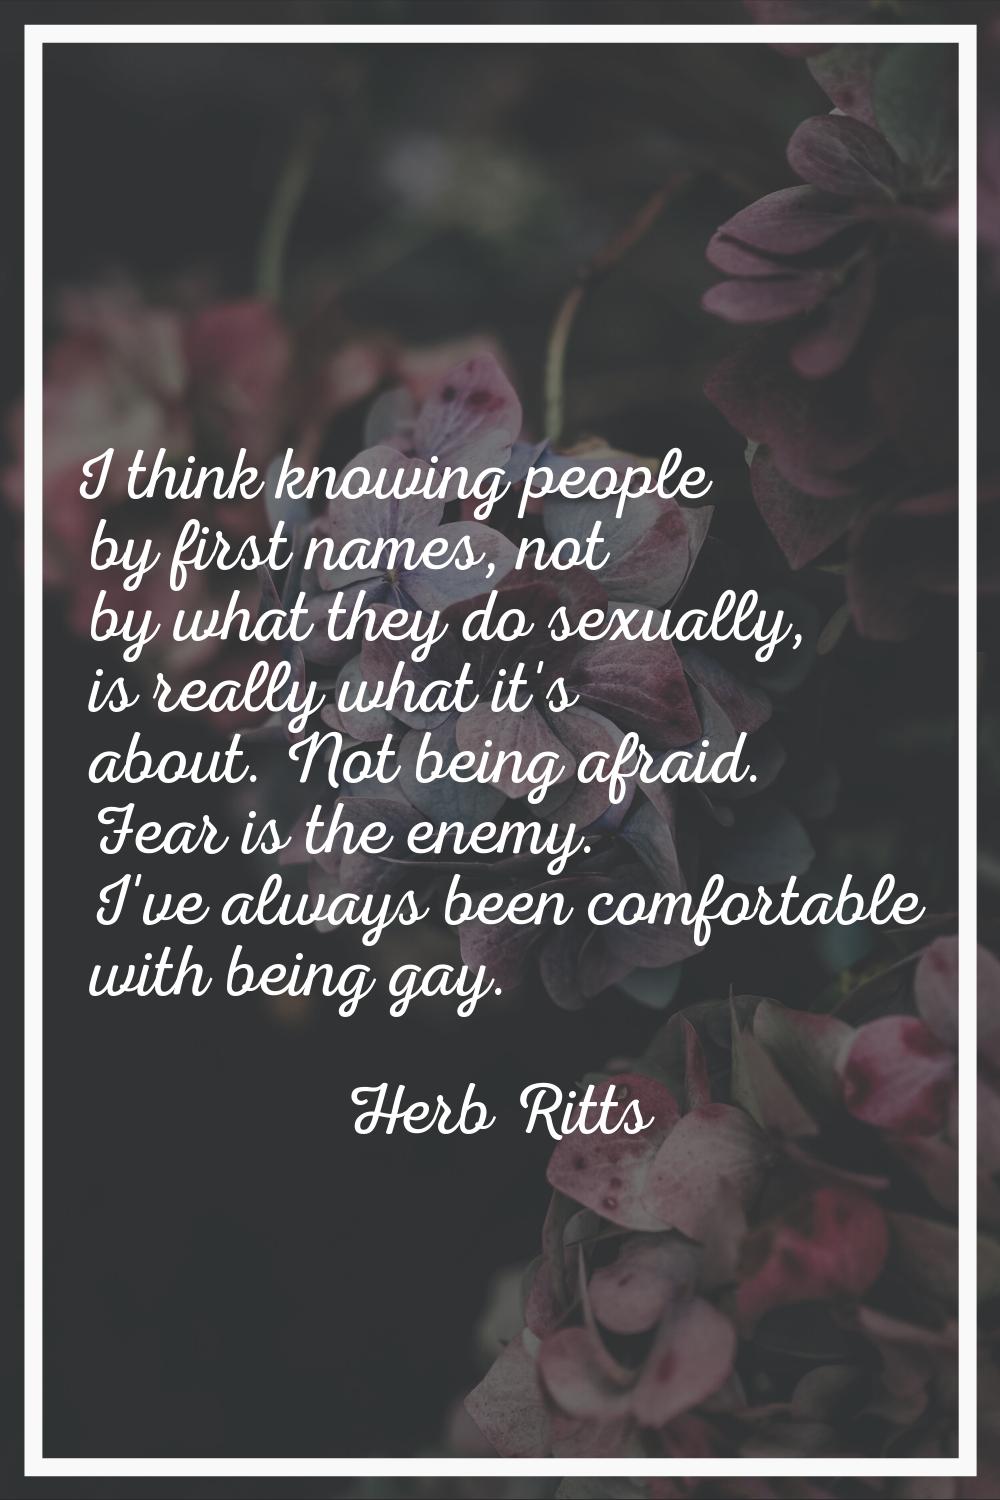 I think knowing people by first names, not by what they do sexually, is really what it's about. Not